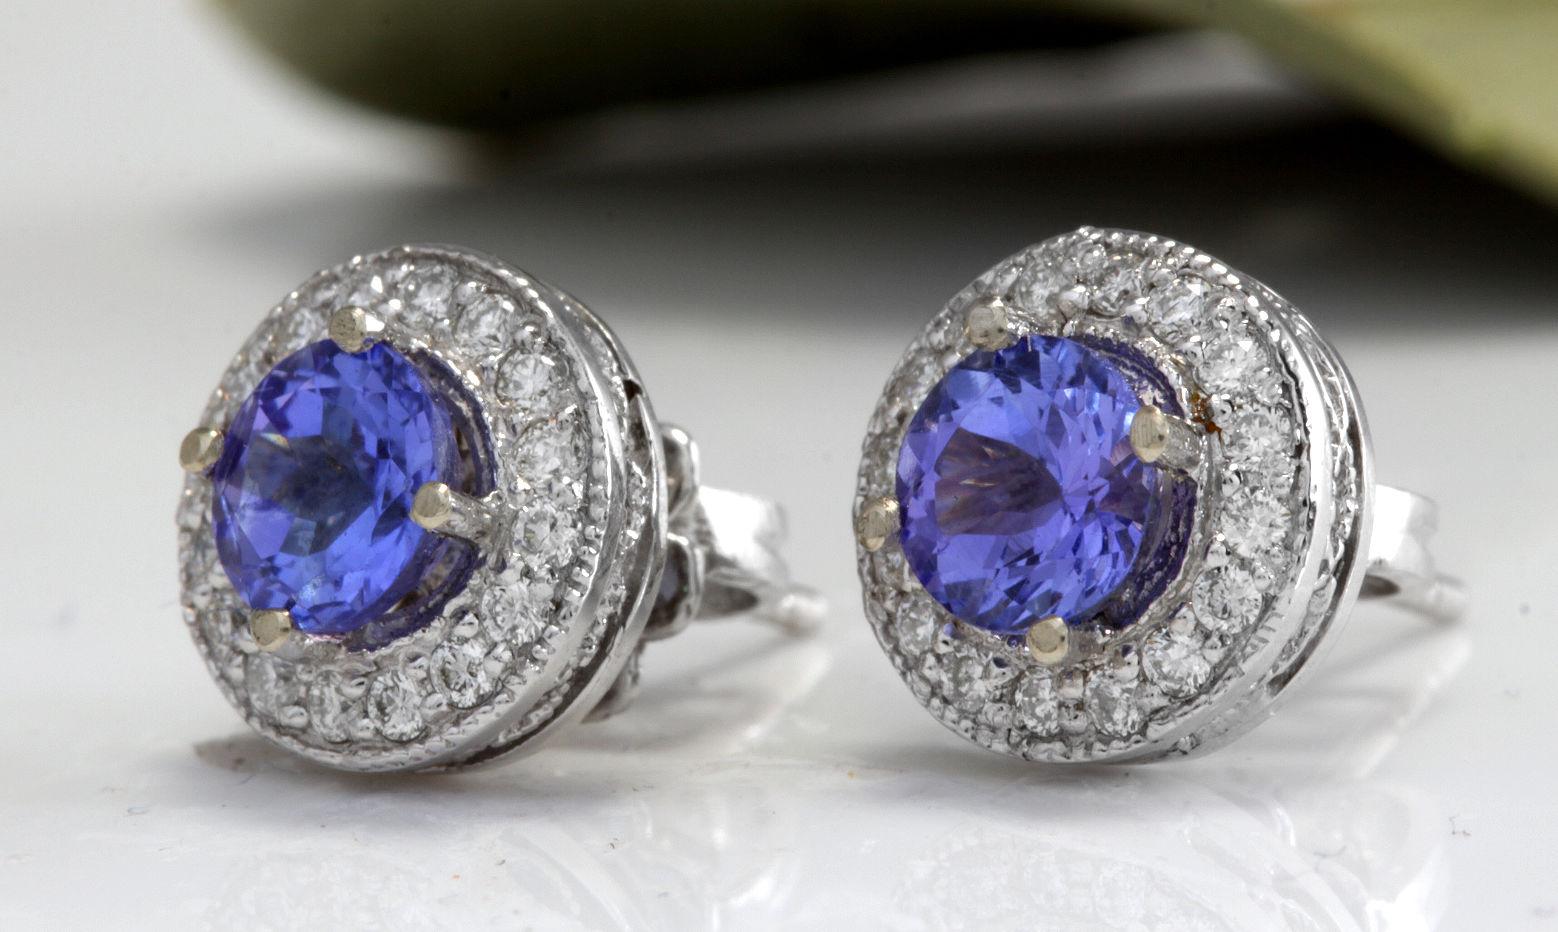 Exquisite 1.80 Carats Natural Tanzanite and Diamond 14K Solid White Gold Stud Earrings

Amazing looking piece!

Total Natural Round Cut White Diamonds Weight: .40 Carats (color G-H / Clarity SI1-SI2)

Total Natural Round Cut Tanzanites Weight: 1.40